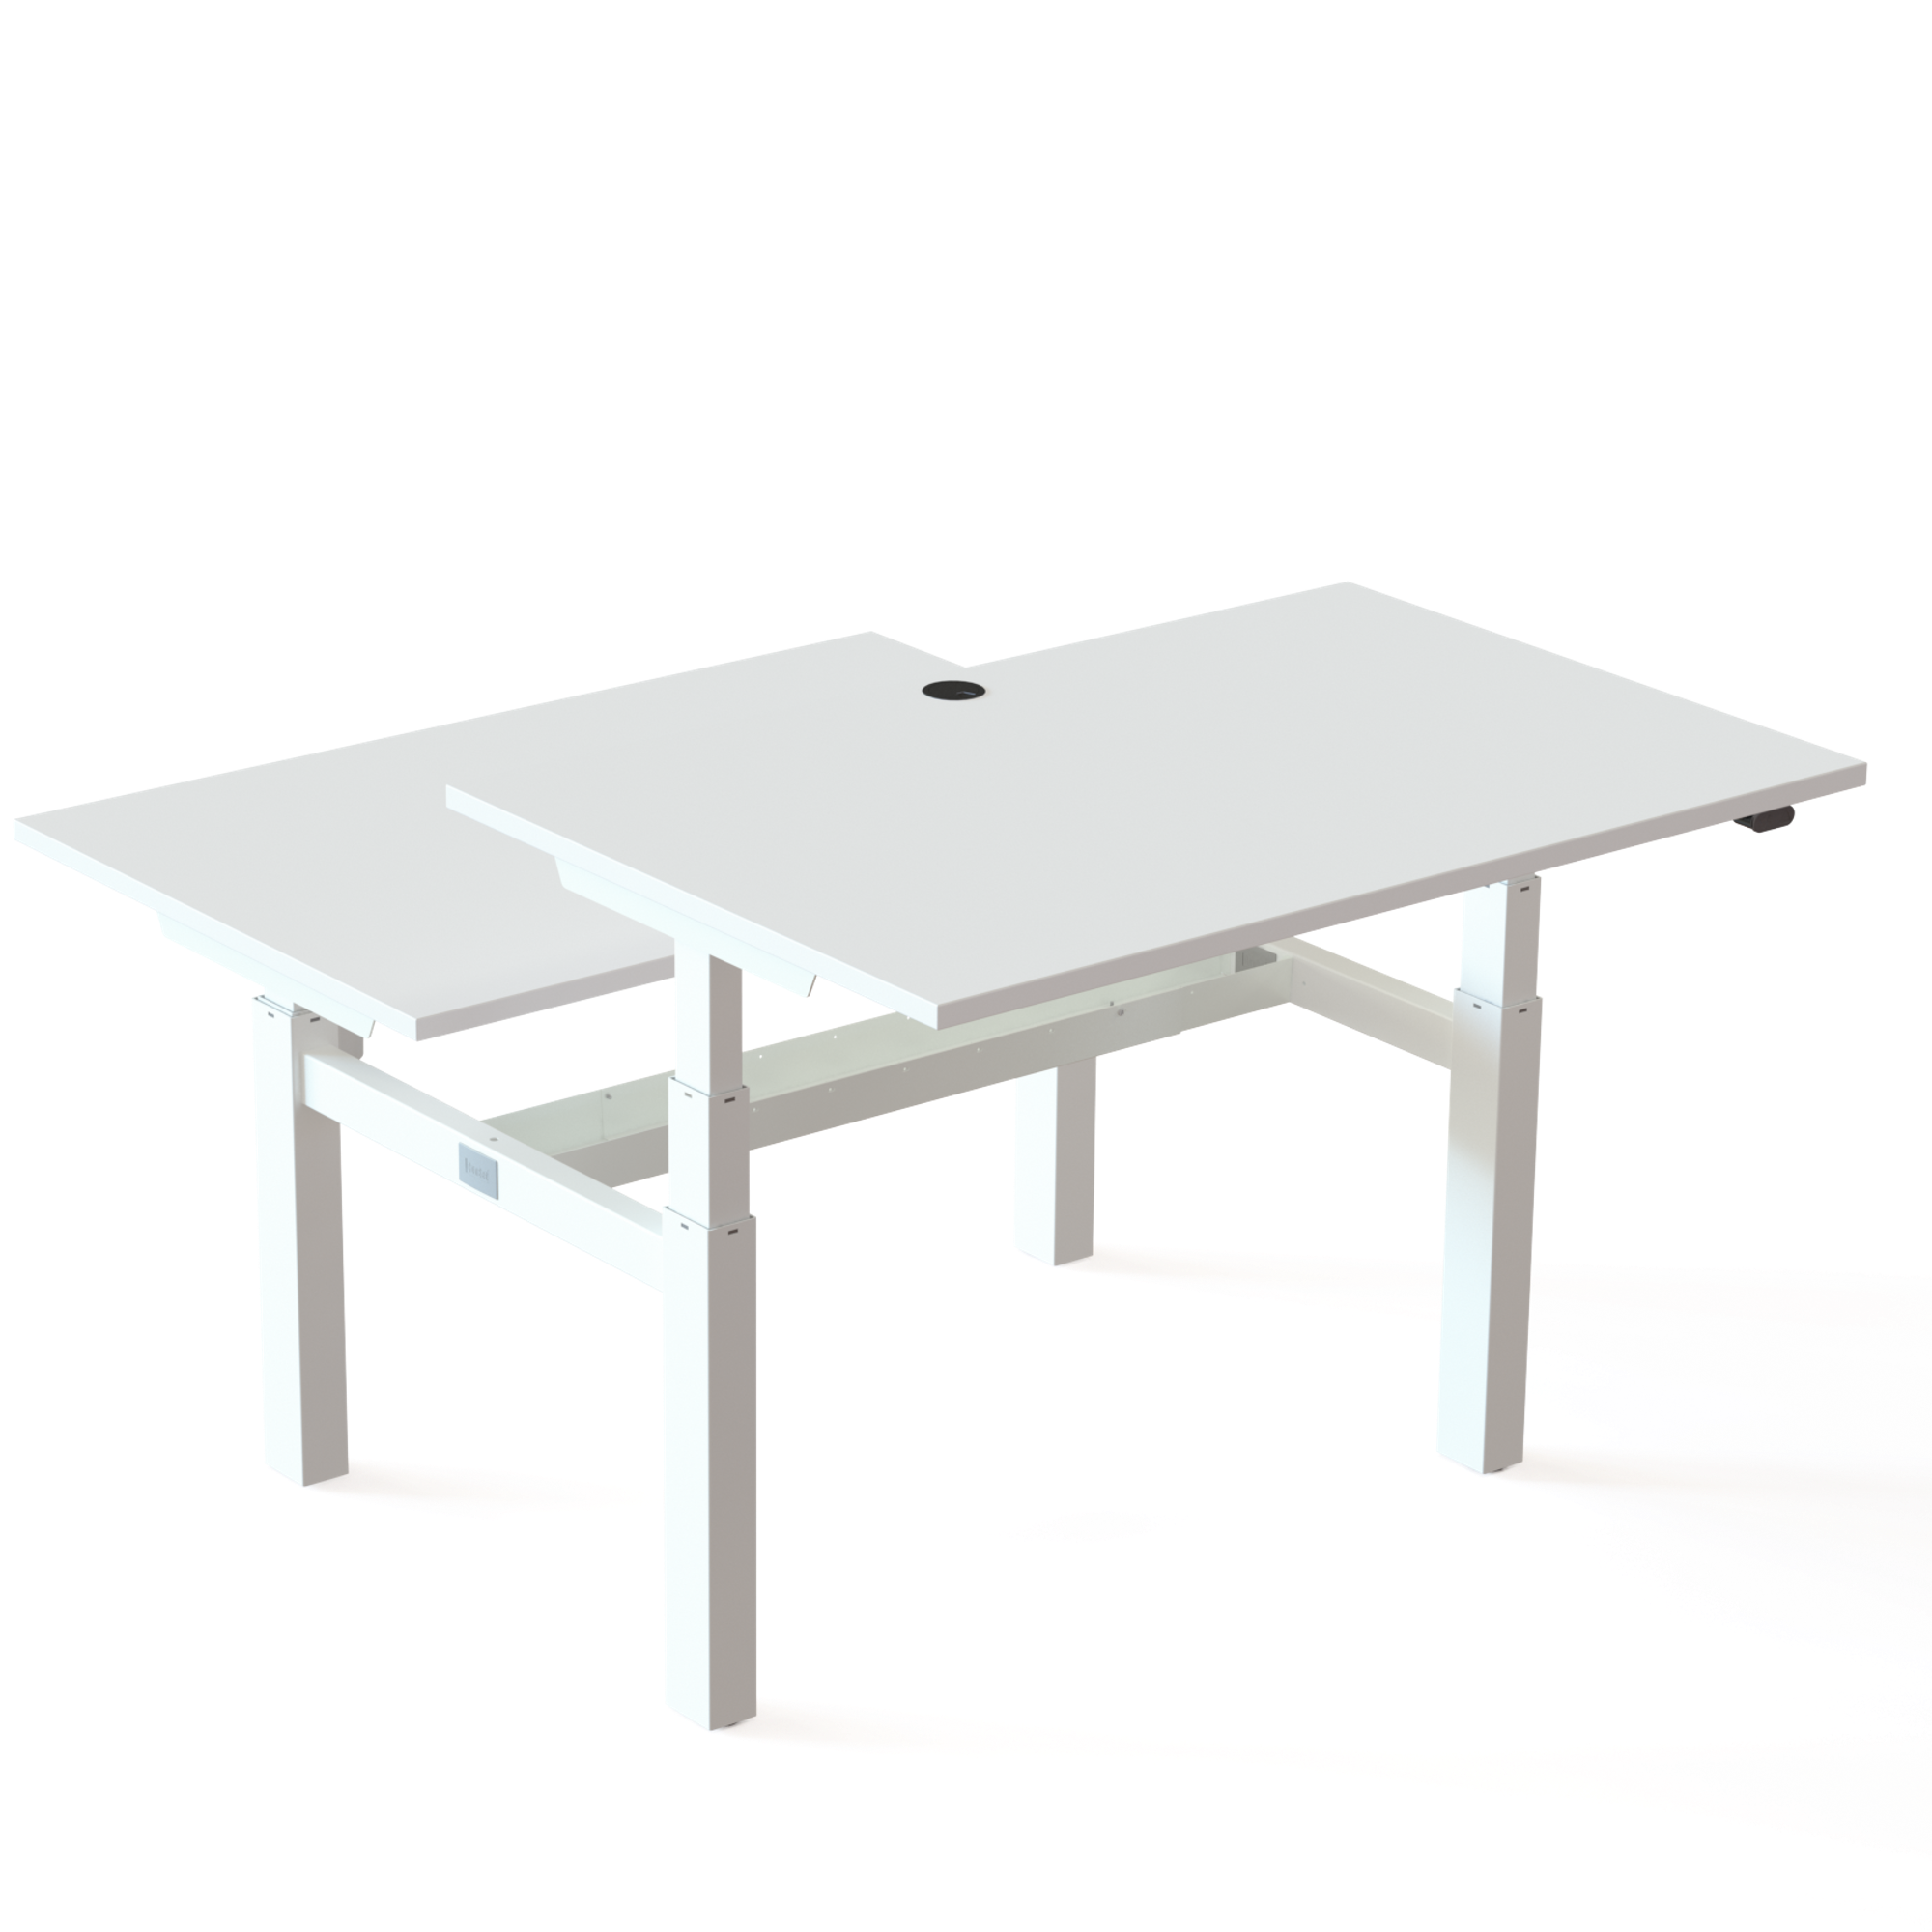 Electric Adjustable Desk | 120x80 cm | White with white frame